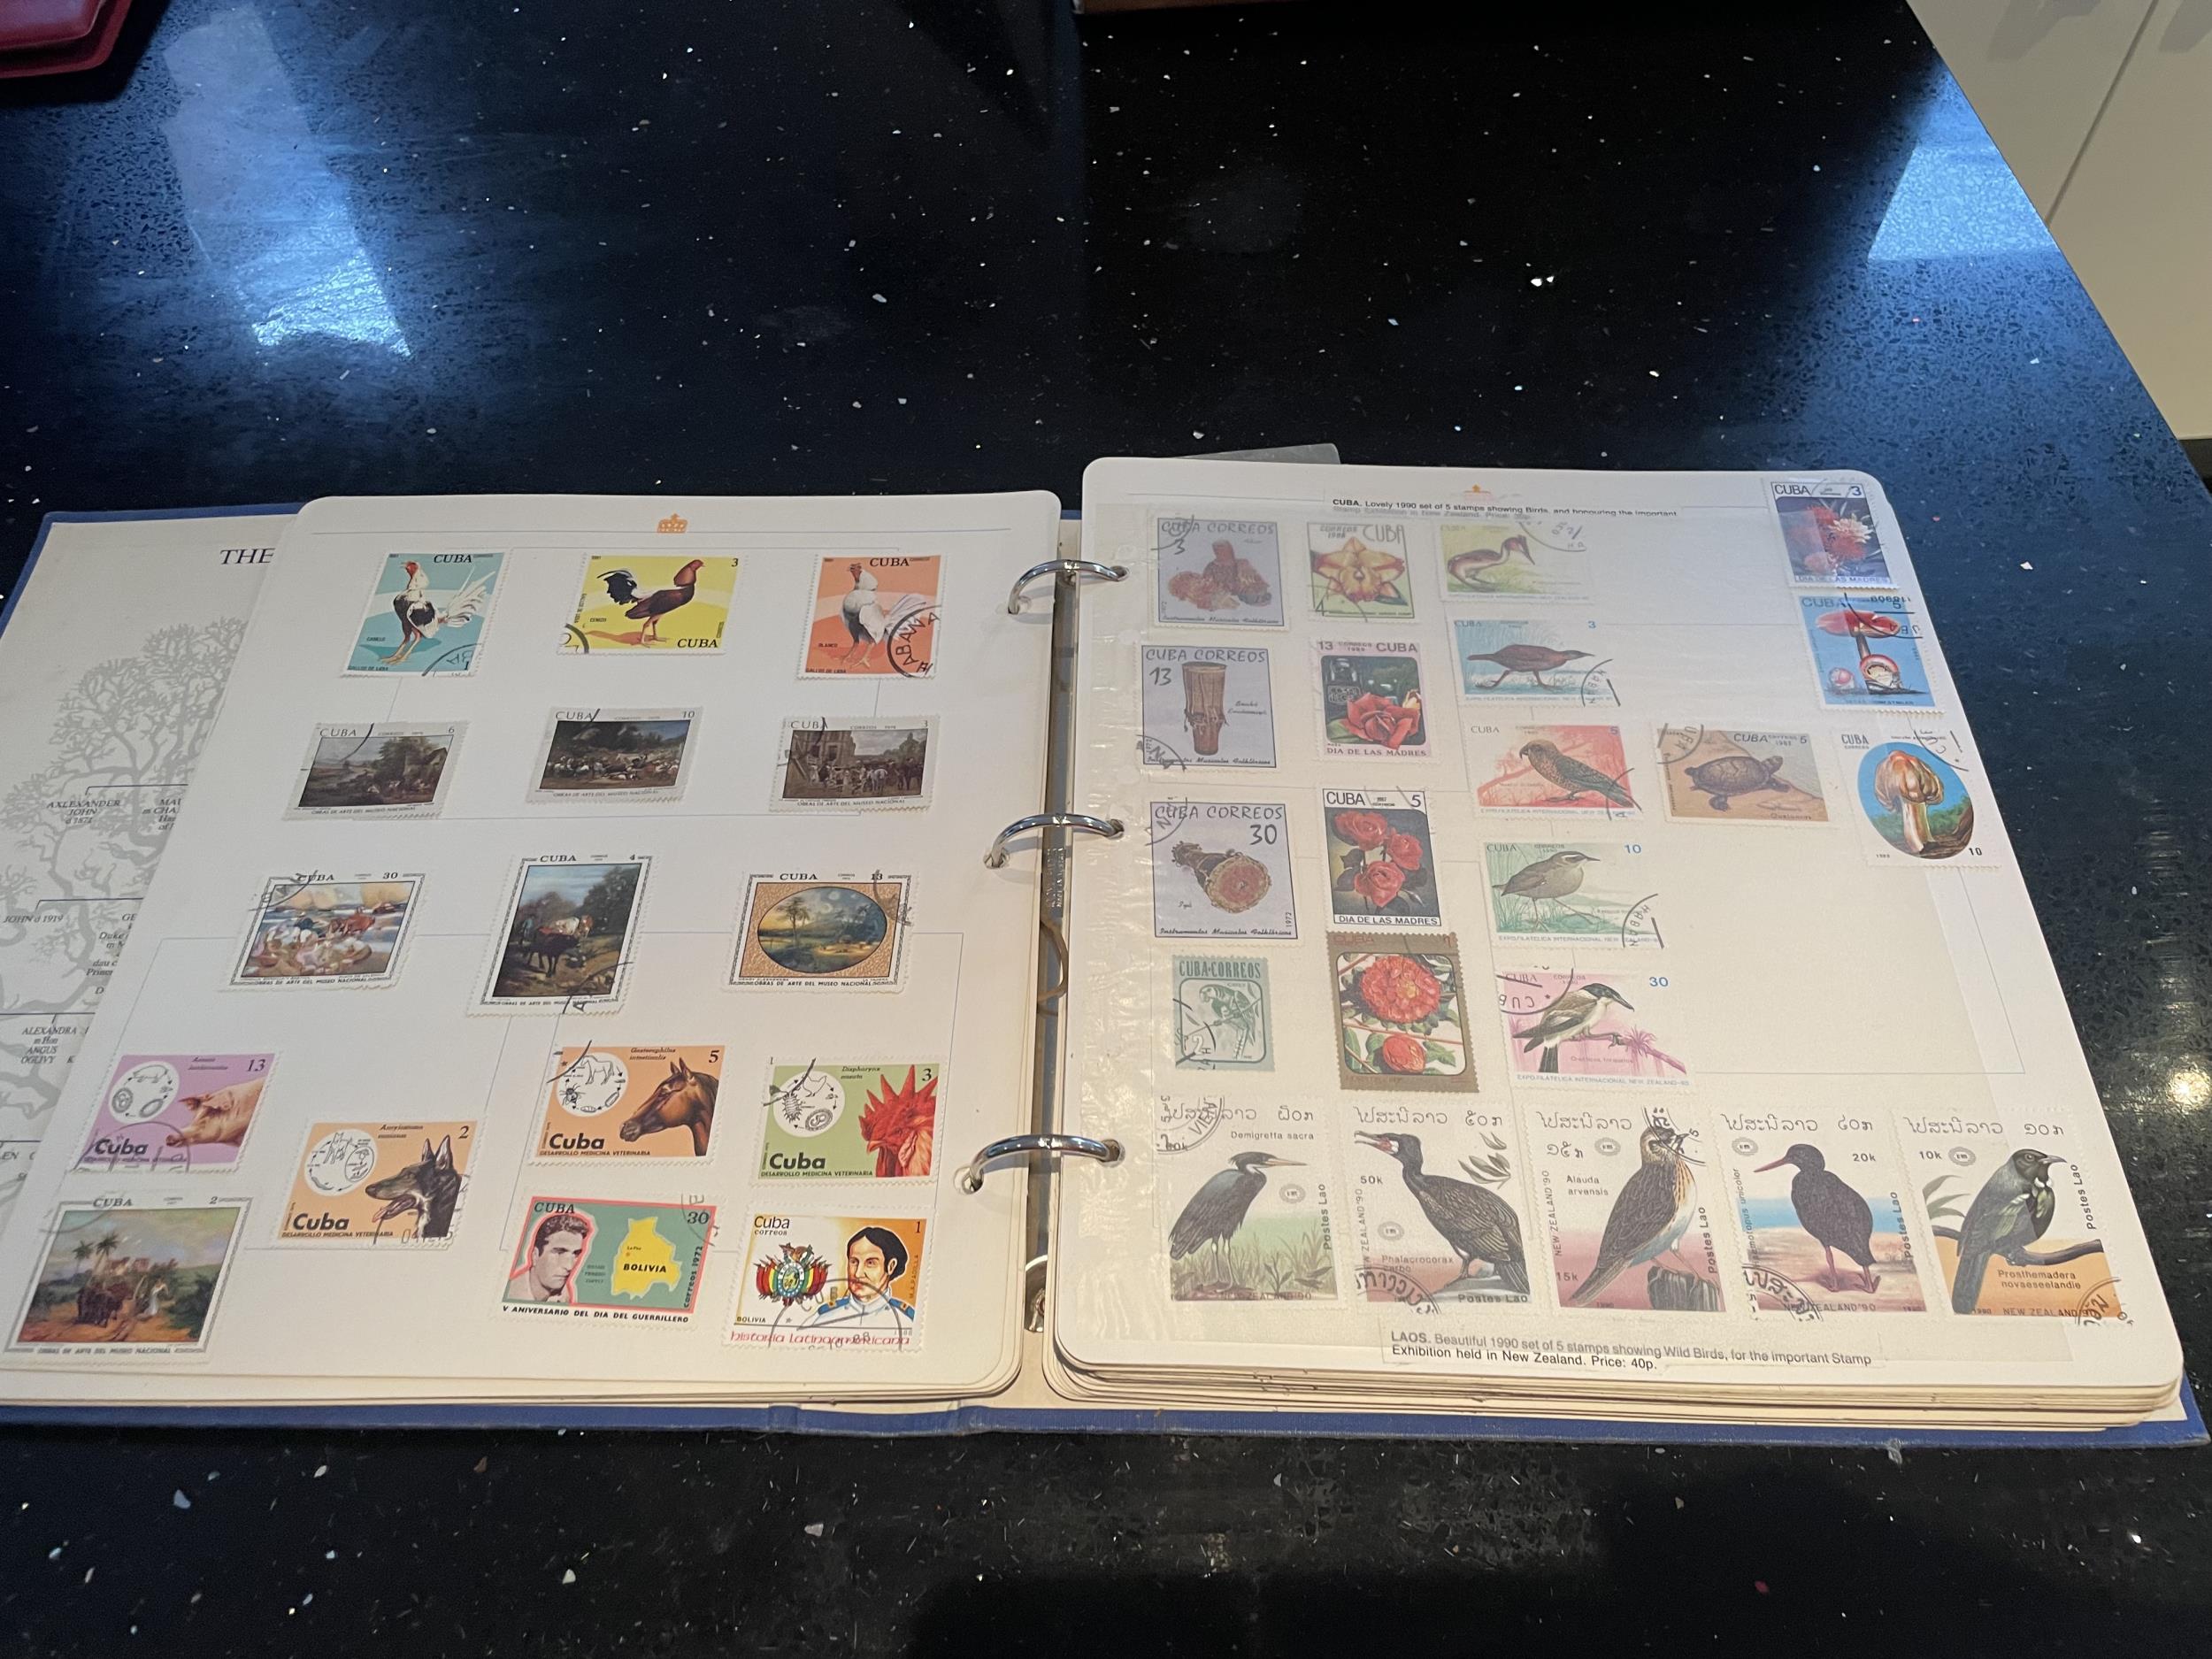 THE ROYAL FAMILY STAMP ALBUM OF WORLD STAMPS - HUNGARY, CUBA, POLAND ETC - Image 5 of 7